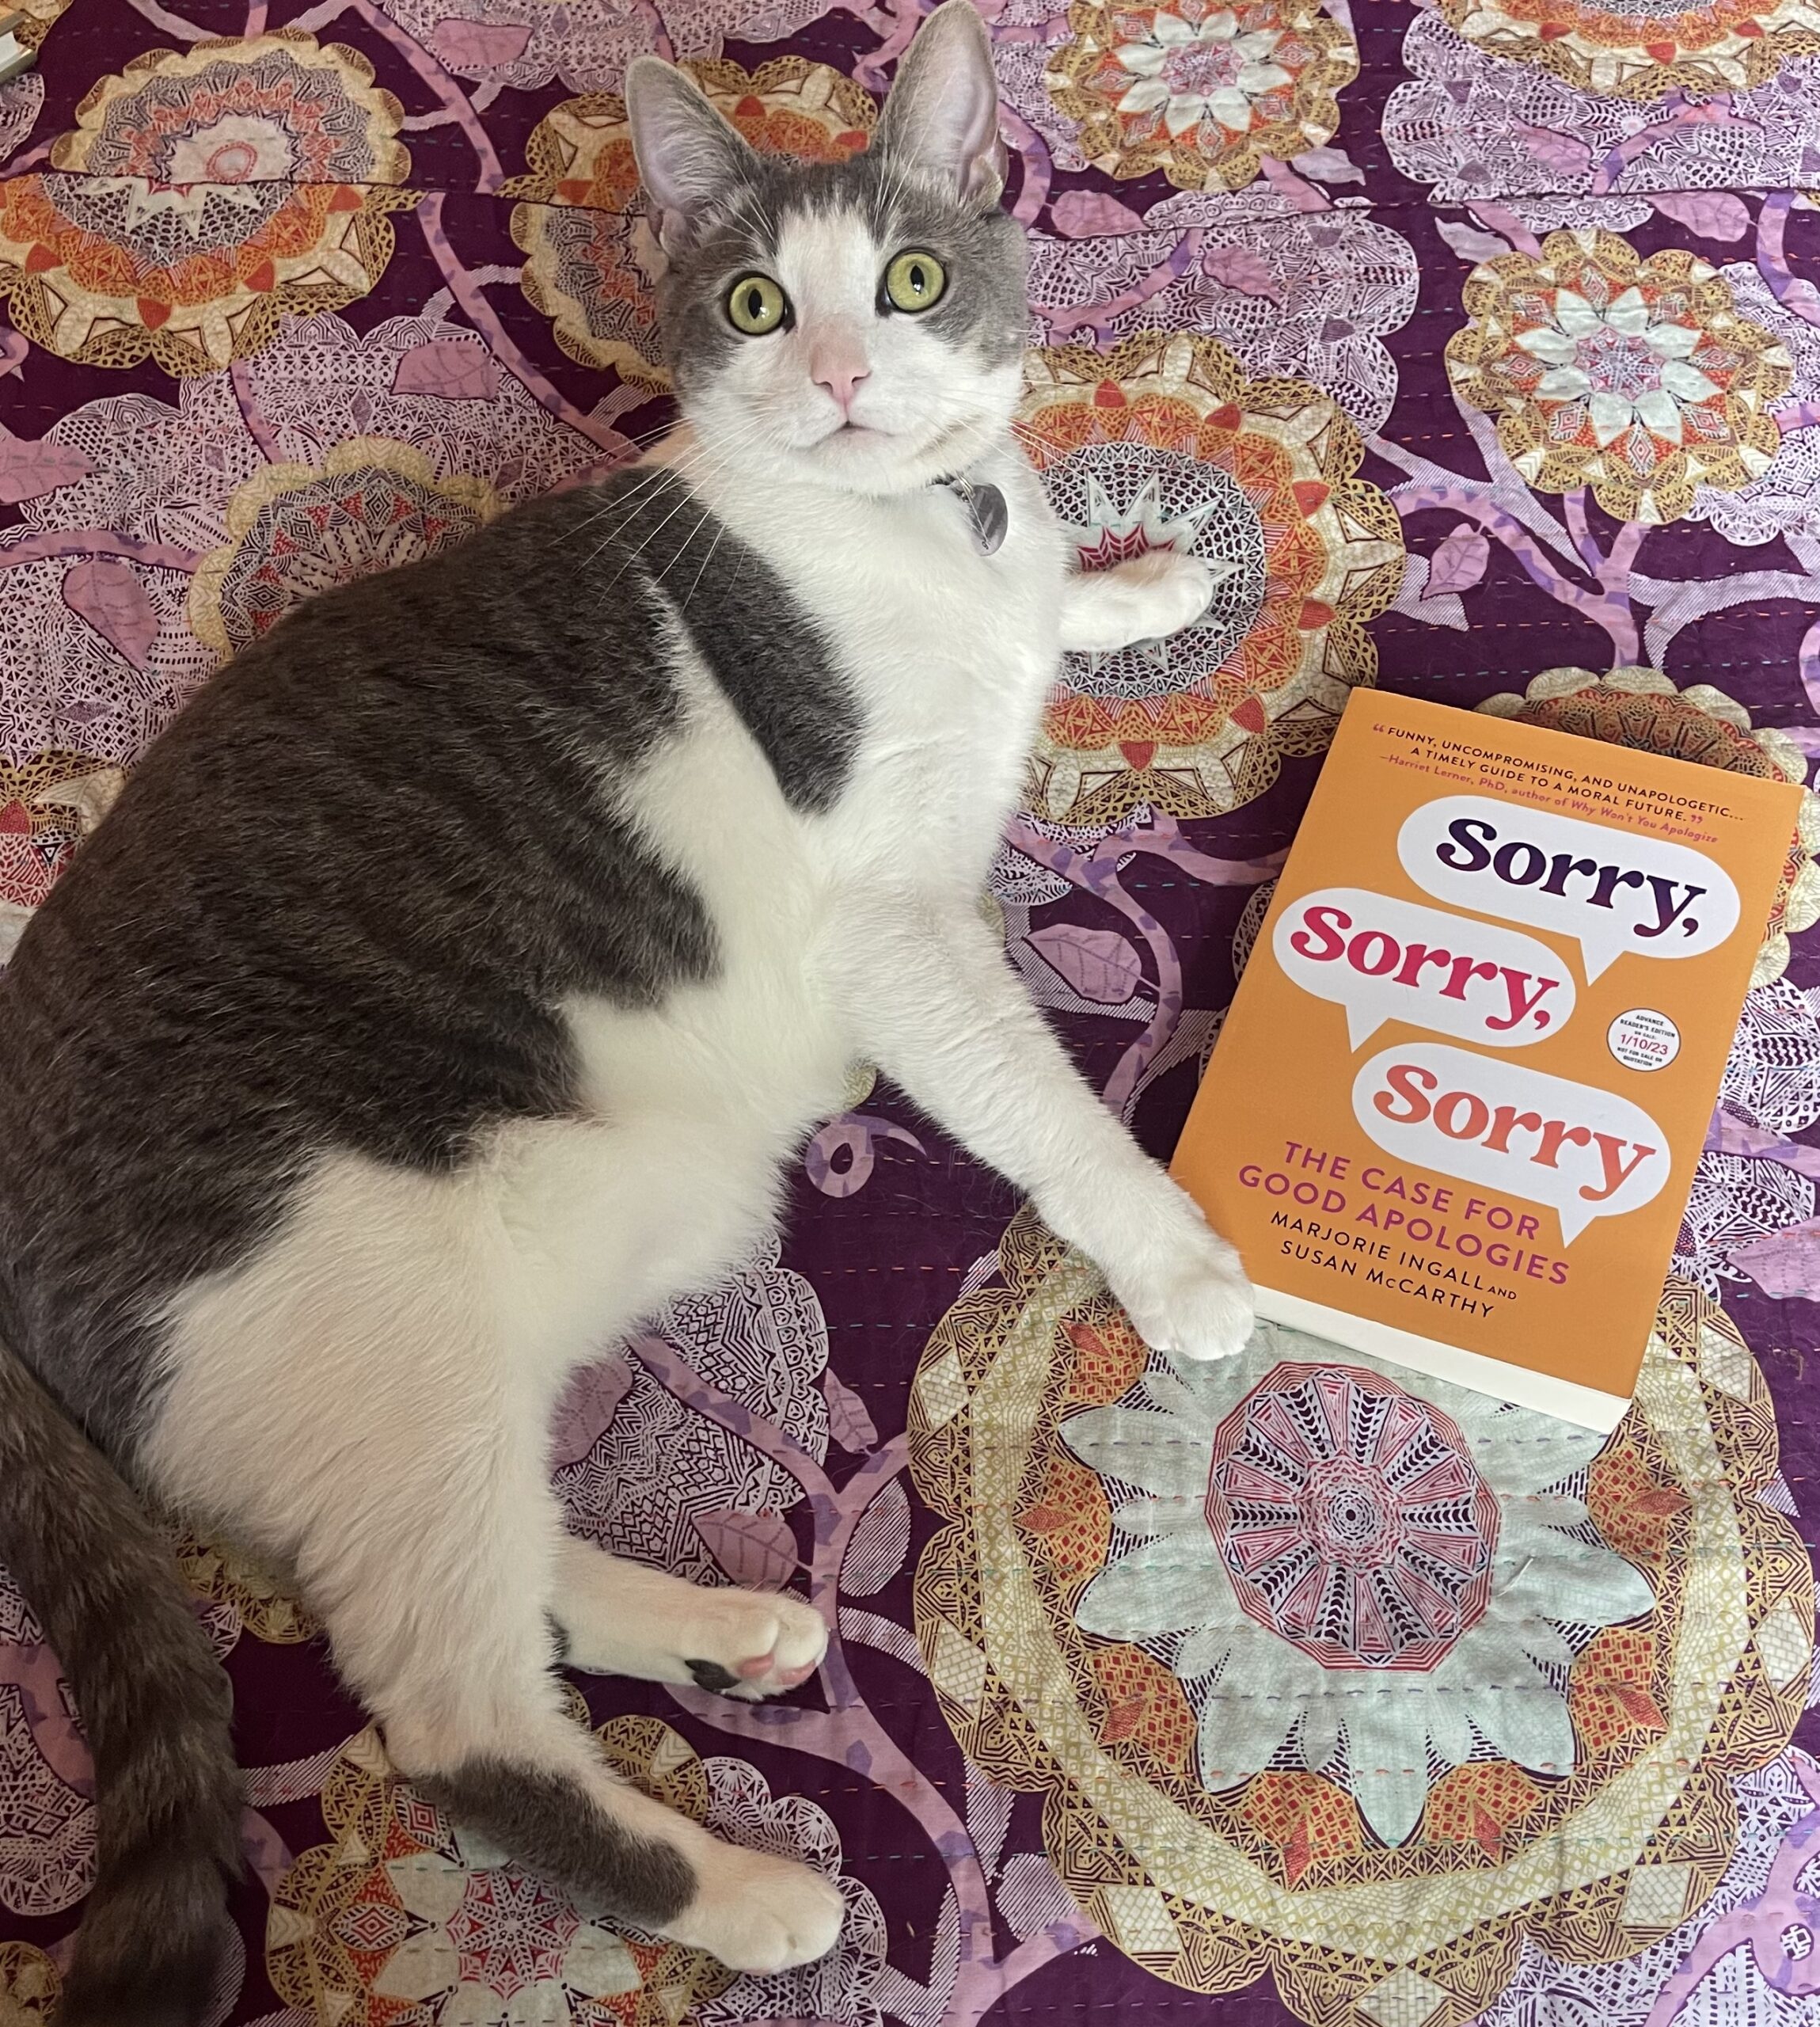 It's Vinnie! A gray and white cat posing glamorously with an Advance Reader Copy of Sorry, Sorry, Sorry: The Case for Good Apologies